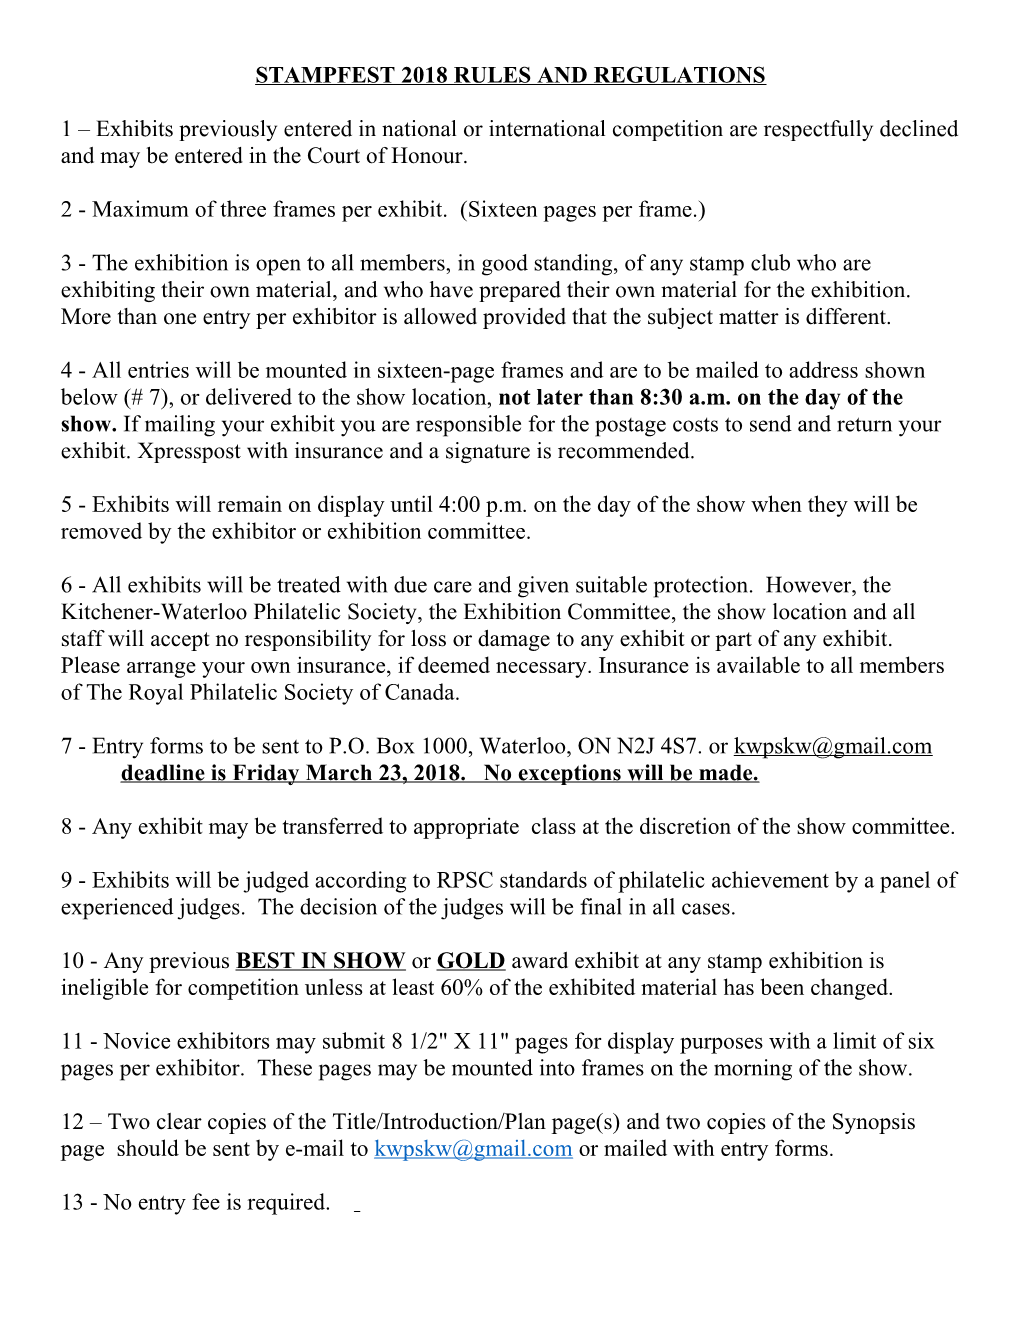 Stampfest 2018 Rules and Regulations